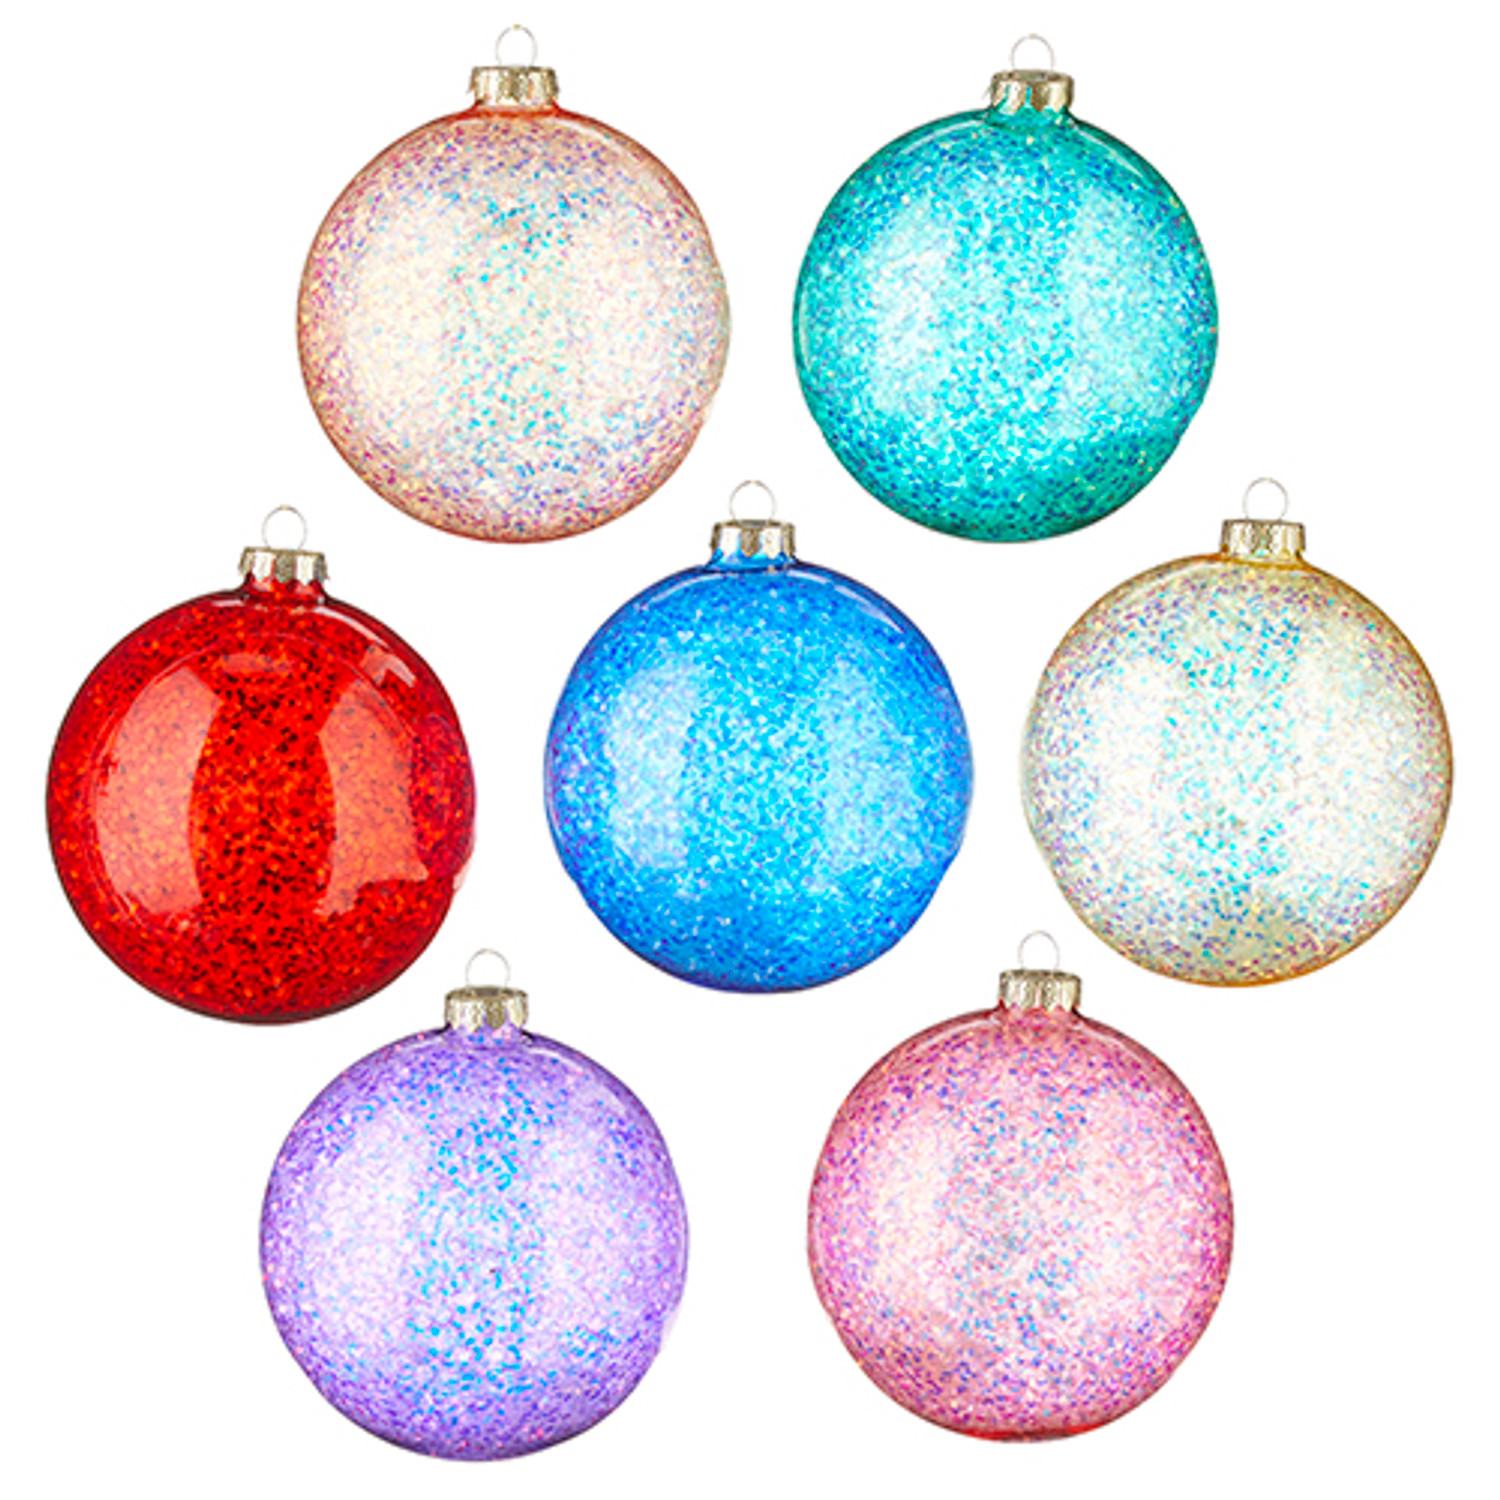 Plastic Every Day is Christmas Ornaments 48ct 40mm Glitter Rainbow